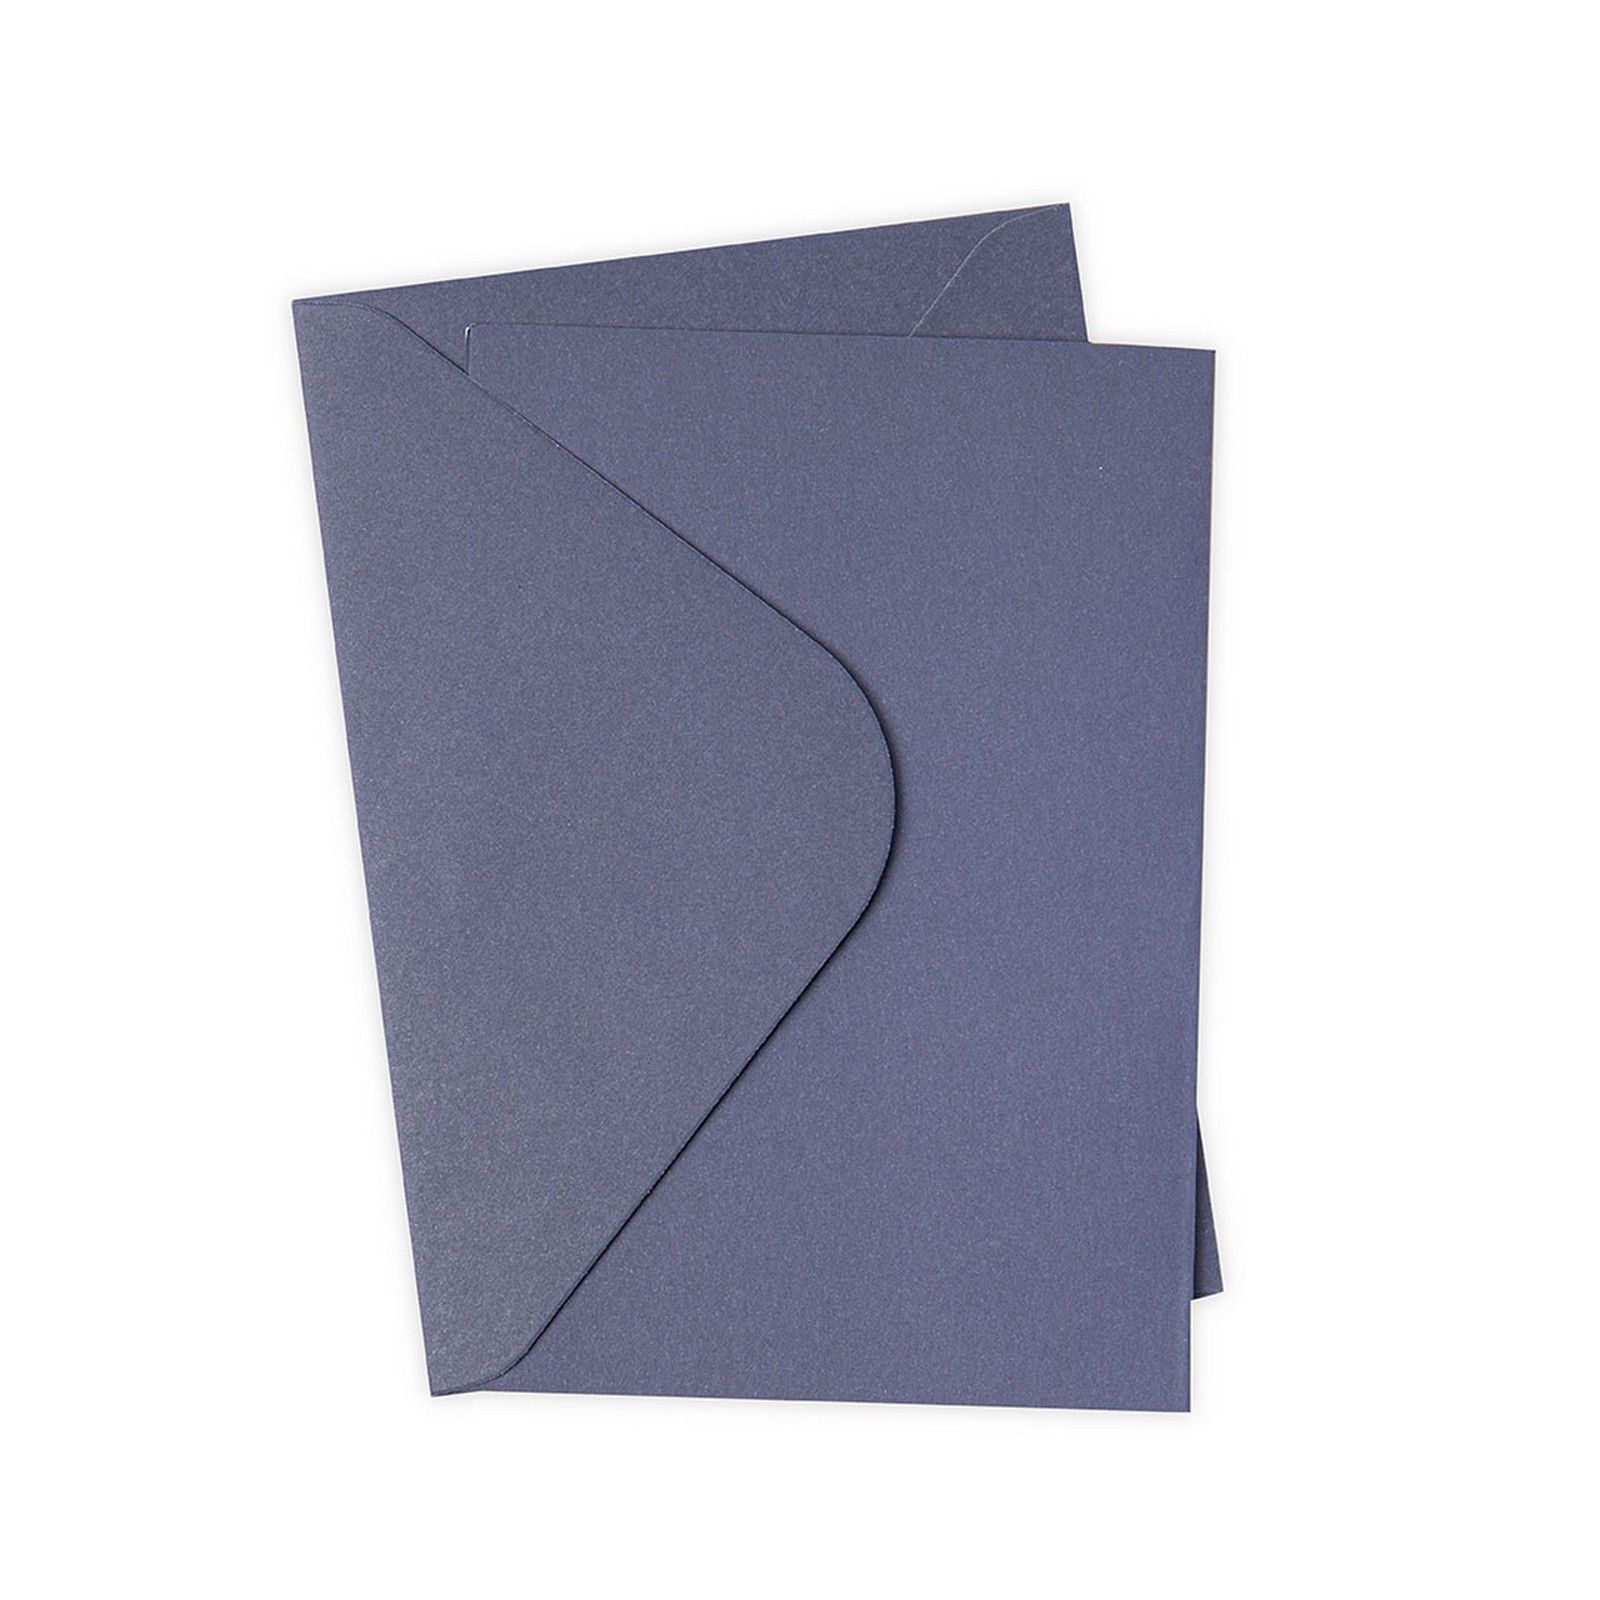 Sizzix • Surfacez Card & Envelope pack A6 French Navy 10pieces